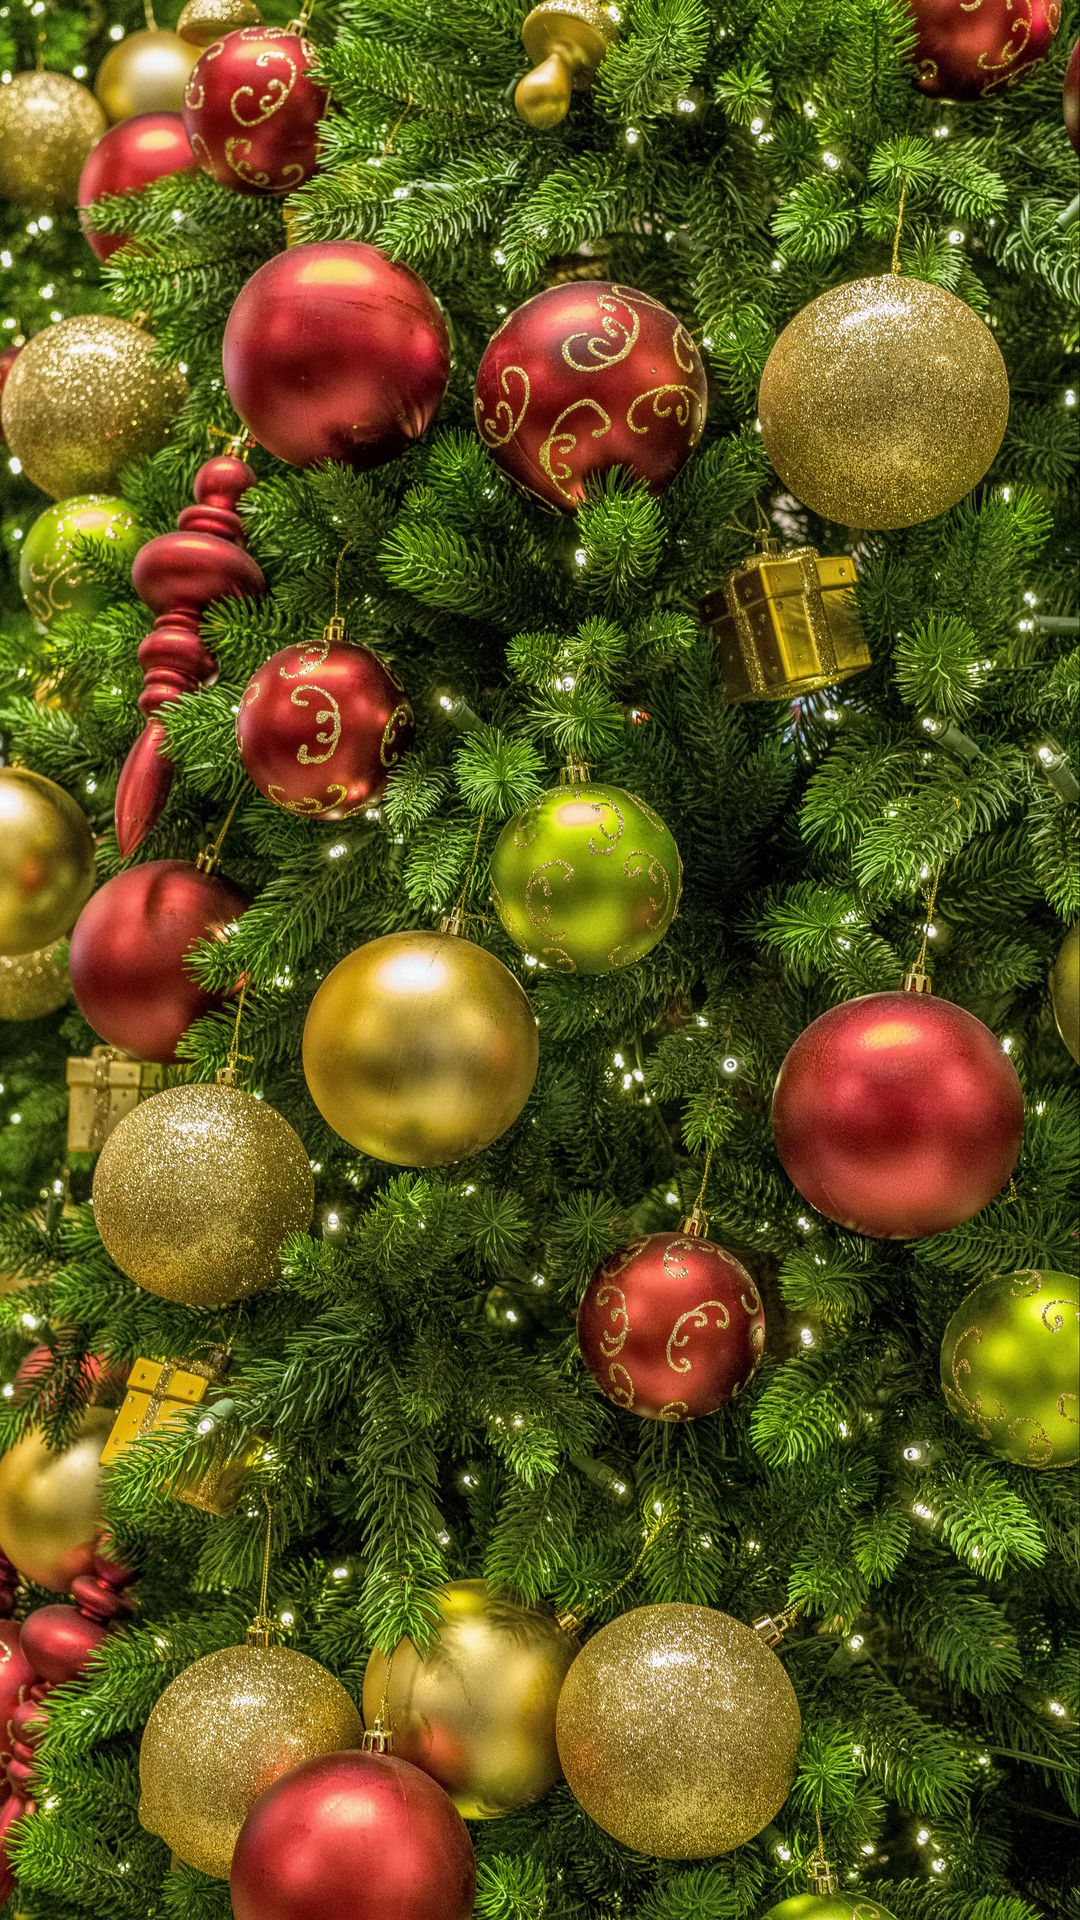 Download wallpaper 1080x1920 christmas tree, balls, new year, christmas, colorful samsung galaxy s s note, sony xperia z, z z z htc one, lenovo vibe HD background